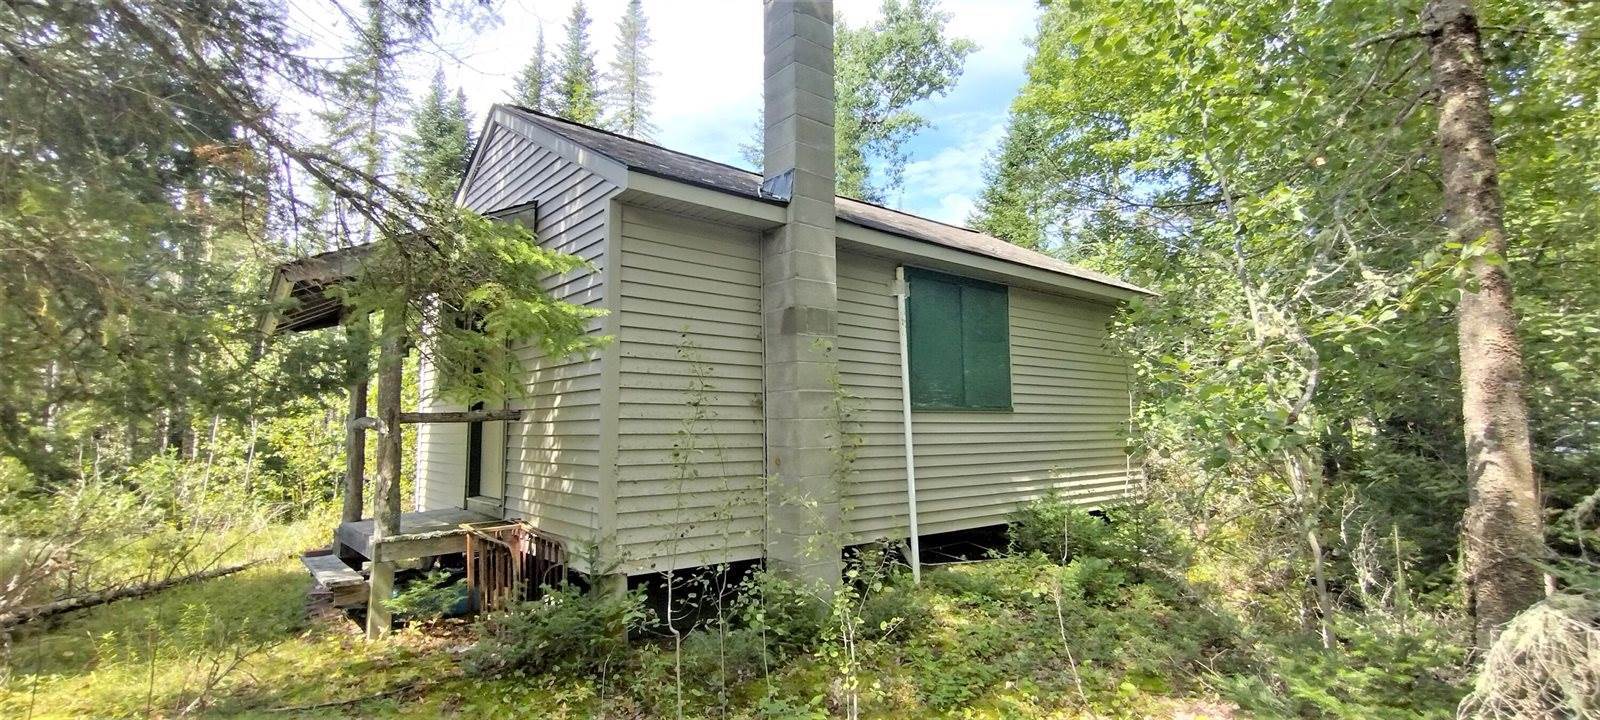 LOT7-10A&B Packard Road, Plymouth, ME 04969